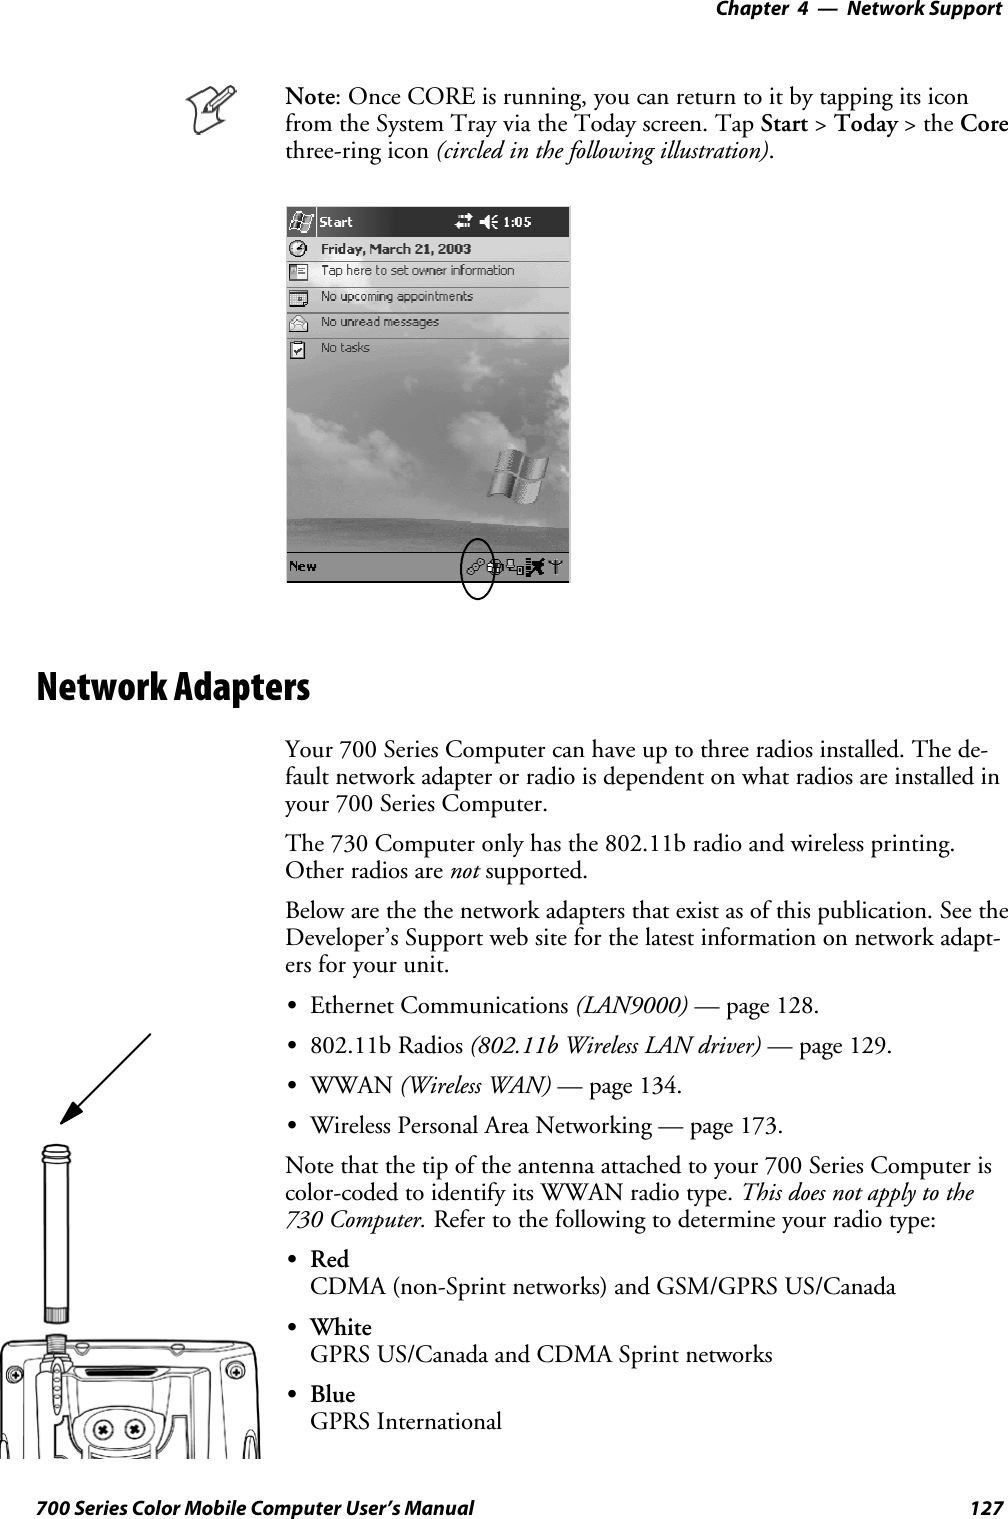 Network Support—Chapter 4127700 Series Color Mobile Computer User’s ManualNote: Once CORE is running, you can return to it by tapping its iconfrom the System Tray via the Today screen. Tap Start &gt;Today &gt;theCorethree-ring icon (circled in the following illustration).Network AdaptersYour 700 Series Computer can have up to three radios installed. The de-fault network adapter or radio is dependent on what radios are installed inyour 700 Series Computer.The 730 Computer only has the 802.11b radio and wireless printing.Other radios are not supported.Below are the the network adapters that exist as of this publication. See theDeveloper’s Support web site for the latest information on network adapt-ers for your unit.SEthernet Communications (LAN9000) — page 128.S802.11b Radios (802.11b Wireless LAN driver) — page 129.SWWAN (Wireless WAN) — page 134.SWireless Personal Area Networking — page 173.Note that the tip of the antenna attached to your 700 Series Computer iscolor-coded to identify its WWAN radio type. Thisdoesnotapplytothe730 Computer. Refer to the following to determine your radio type:SRedCDMA (non-Sprint networks) and GSM/GPRS US/CanadaSWhiteGPRS US/Canada and CDMA Sprint networksSBlueGPRS International